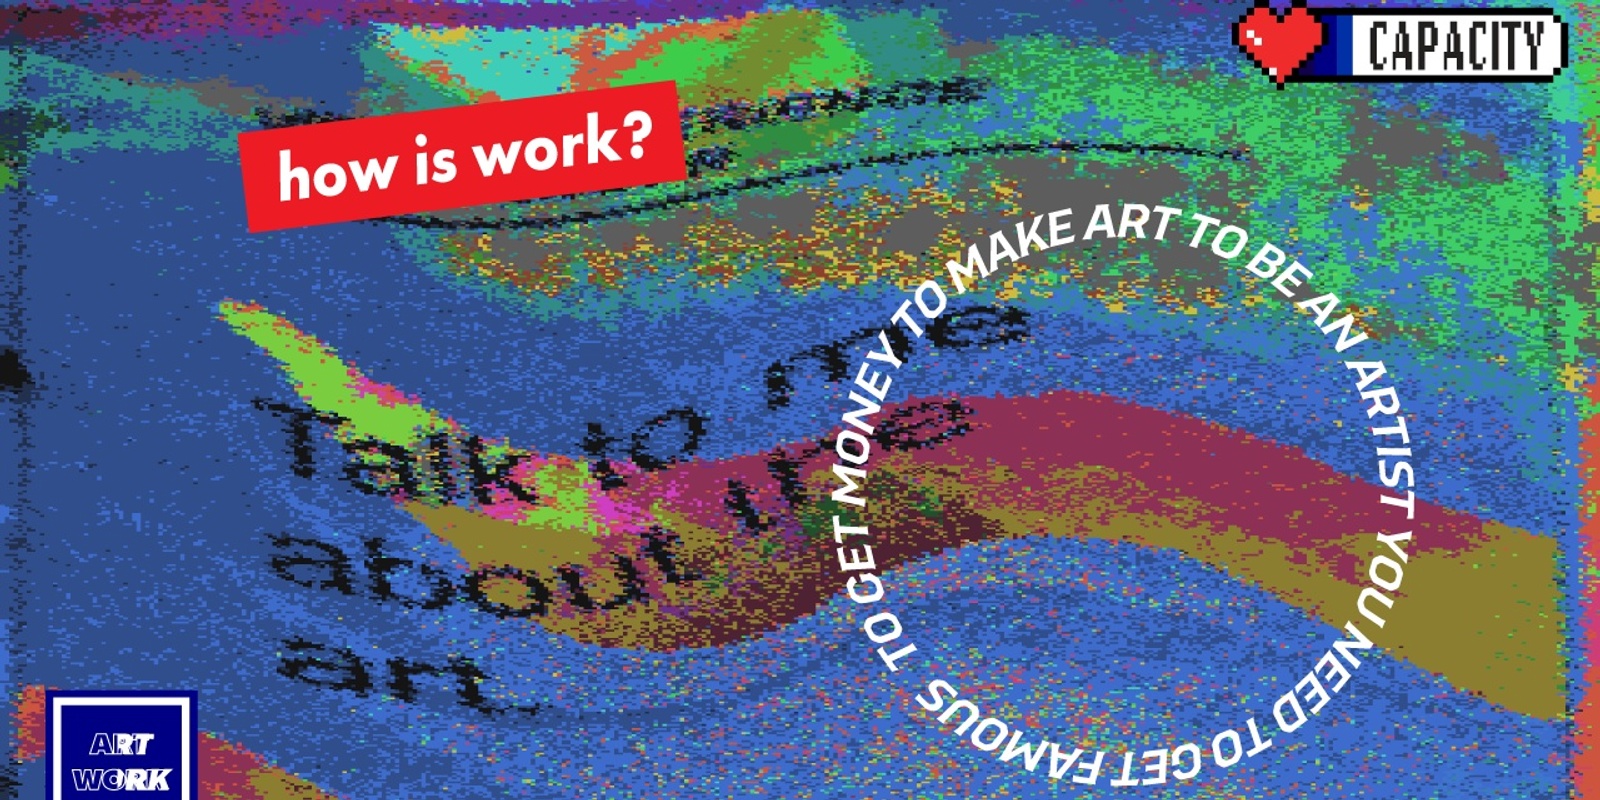 Banner image for how is work?